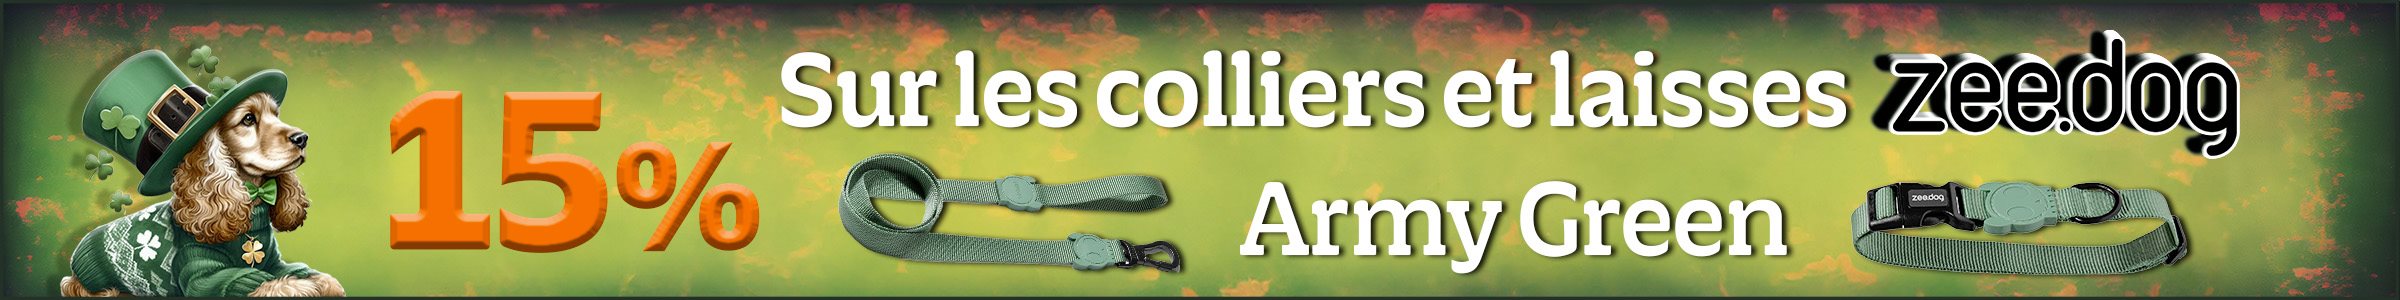 Zee dog - collier et laisse army green